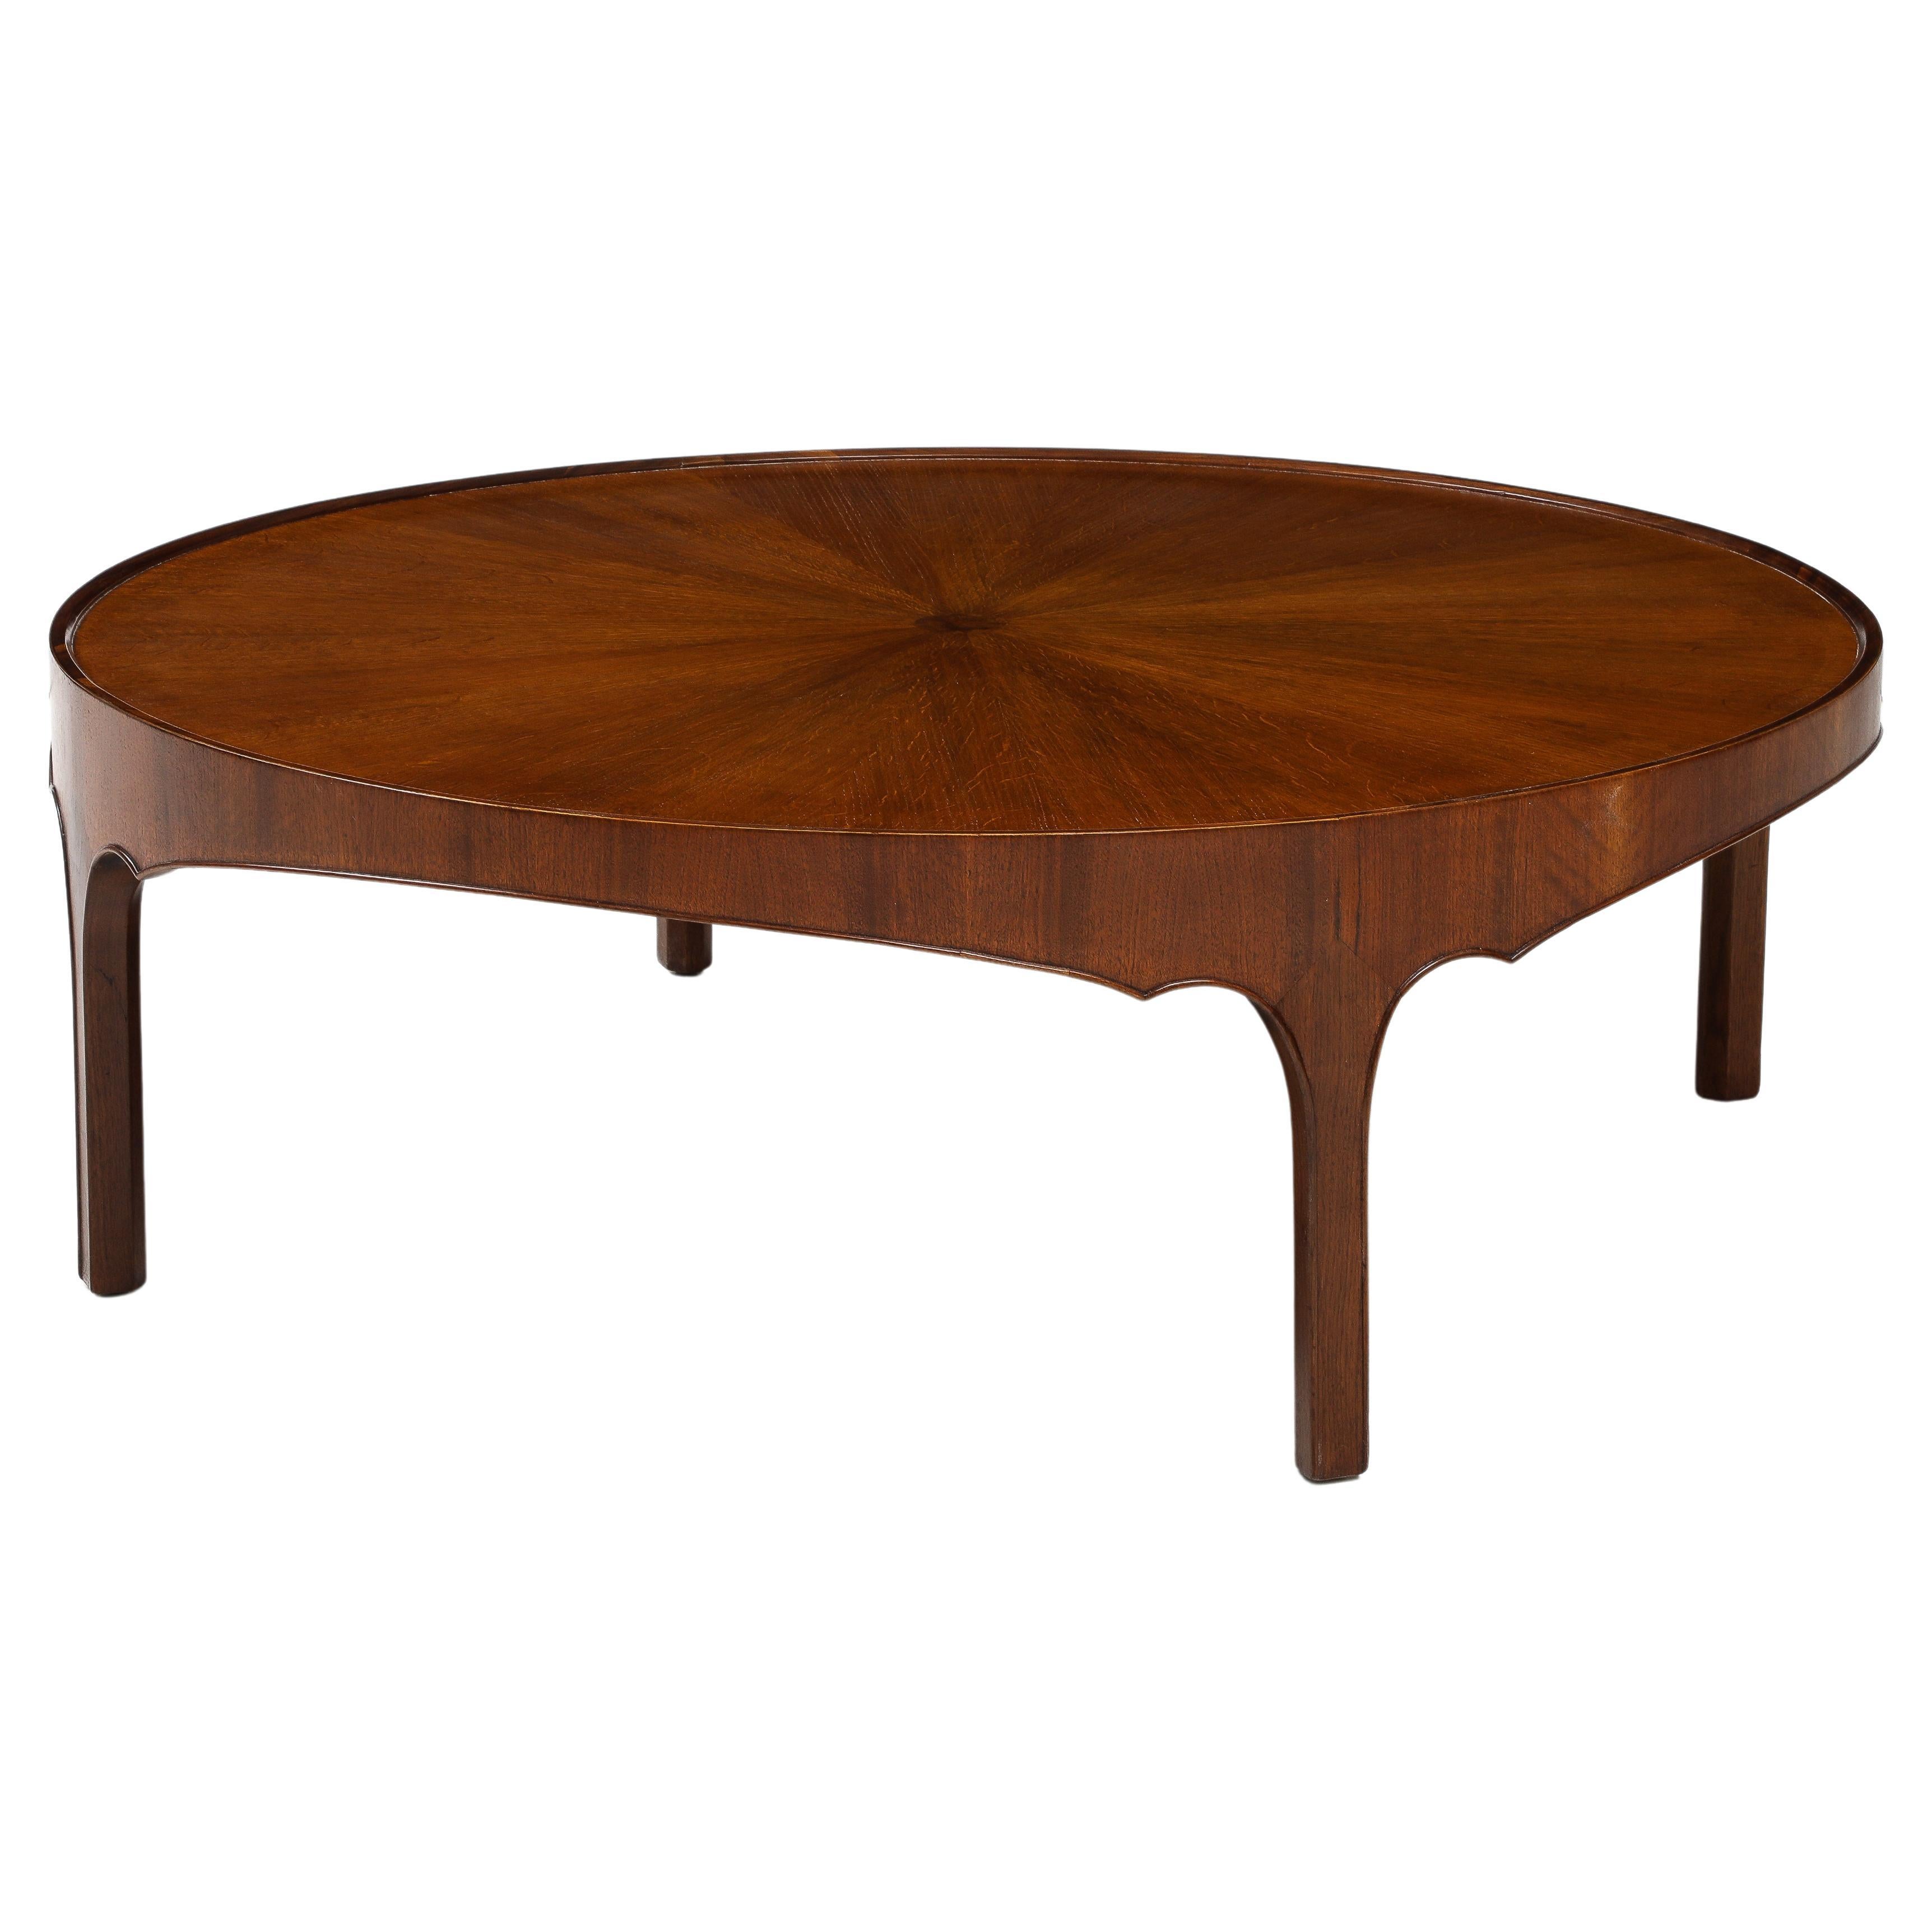 Round Baker Oversized 1960's Modern Walnut Coffee Table With Sunburst Top For Sale